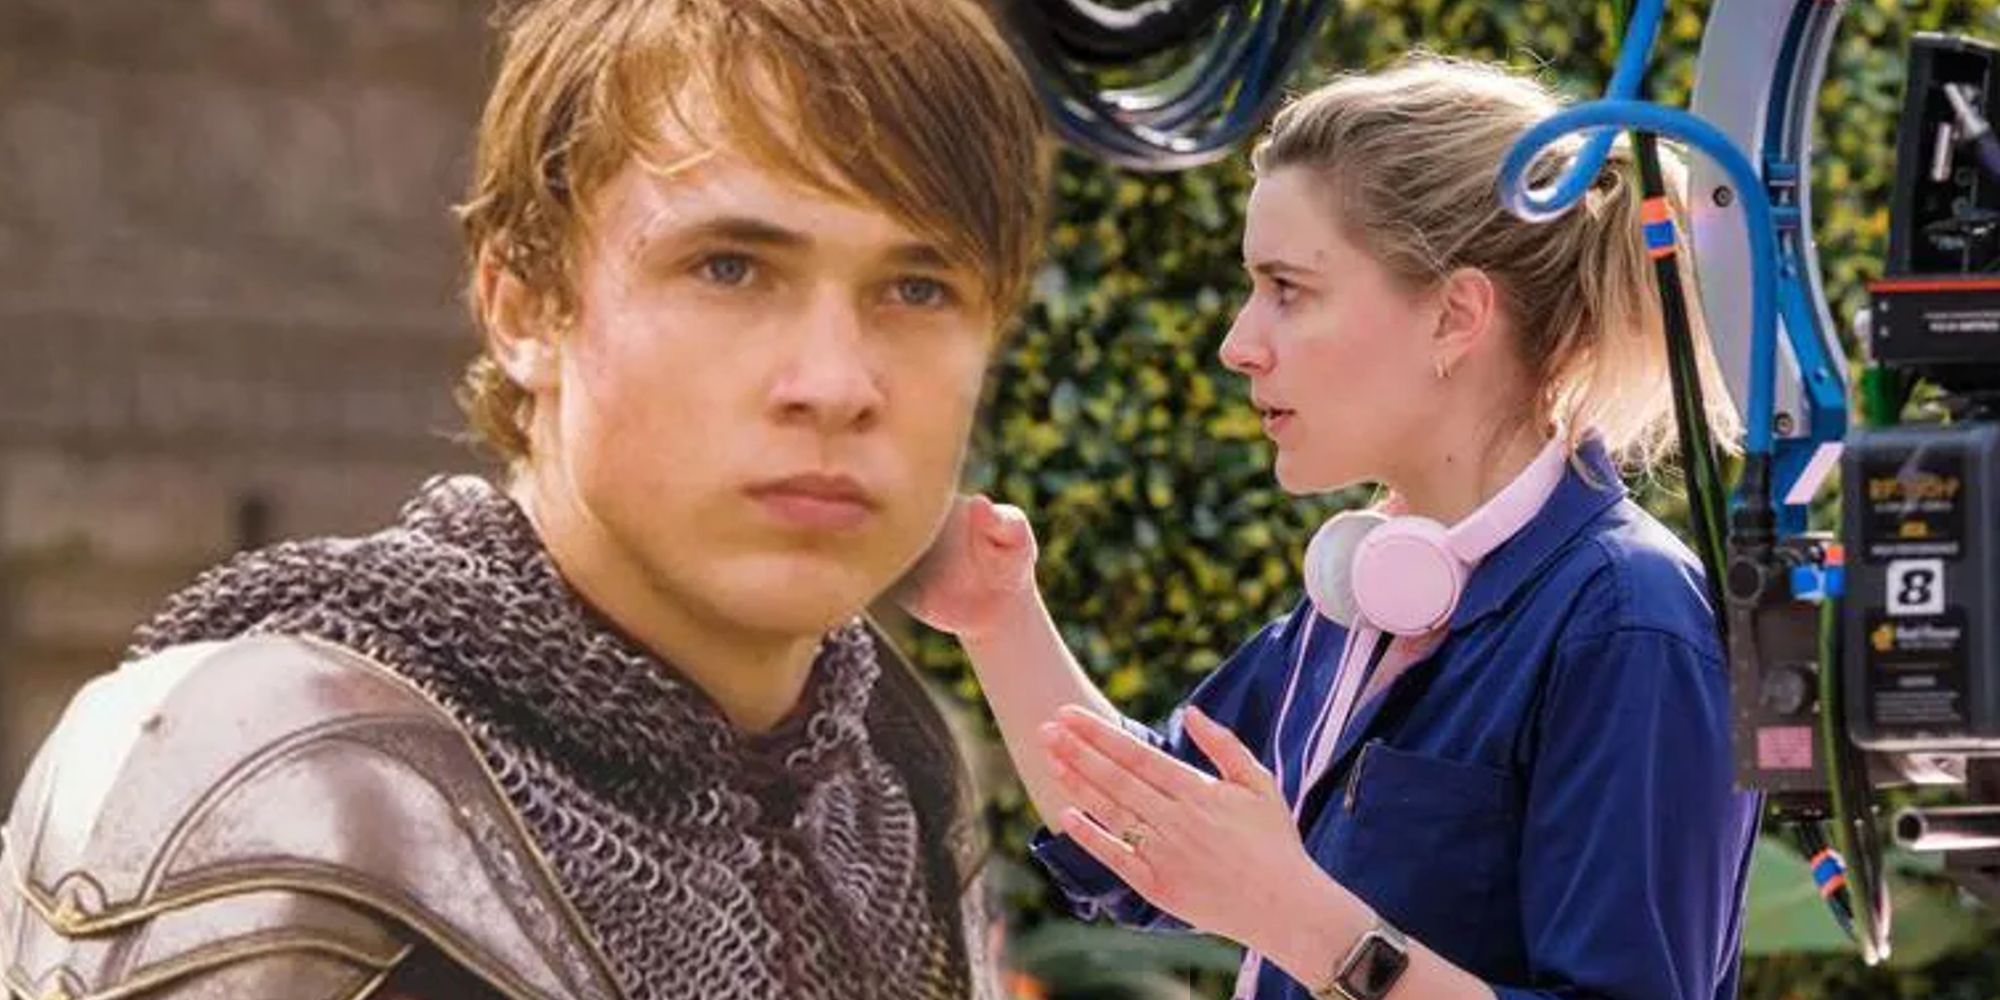 The Chronicles of Narnia William Moseley as Peter Praises composited with Greta Gerwig directing